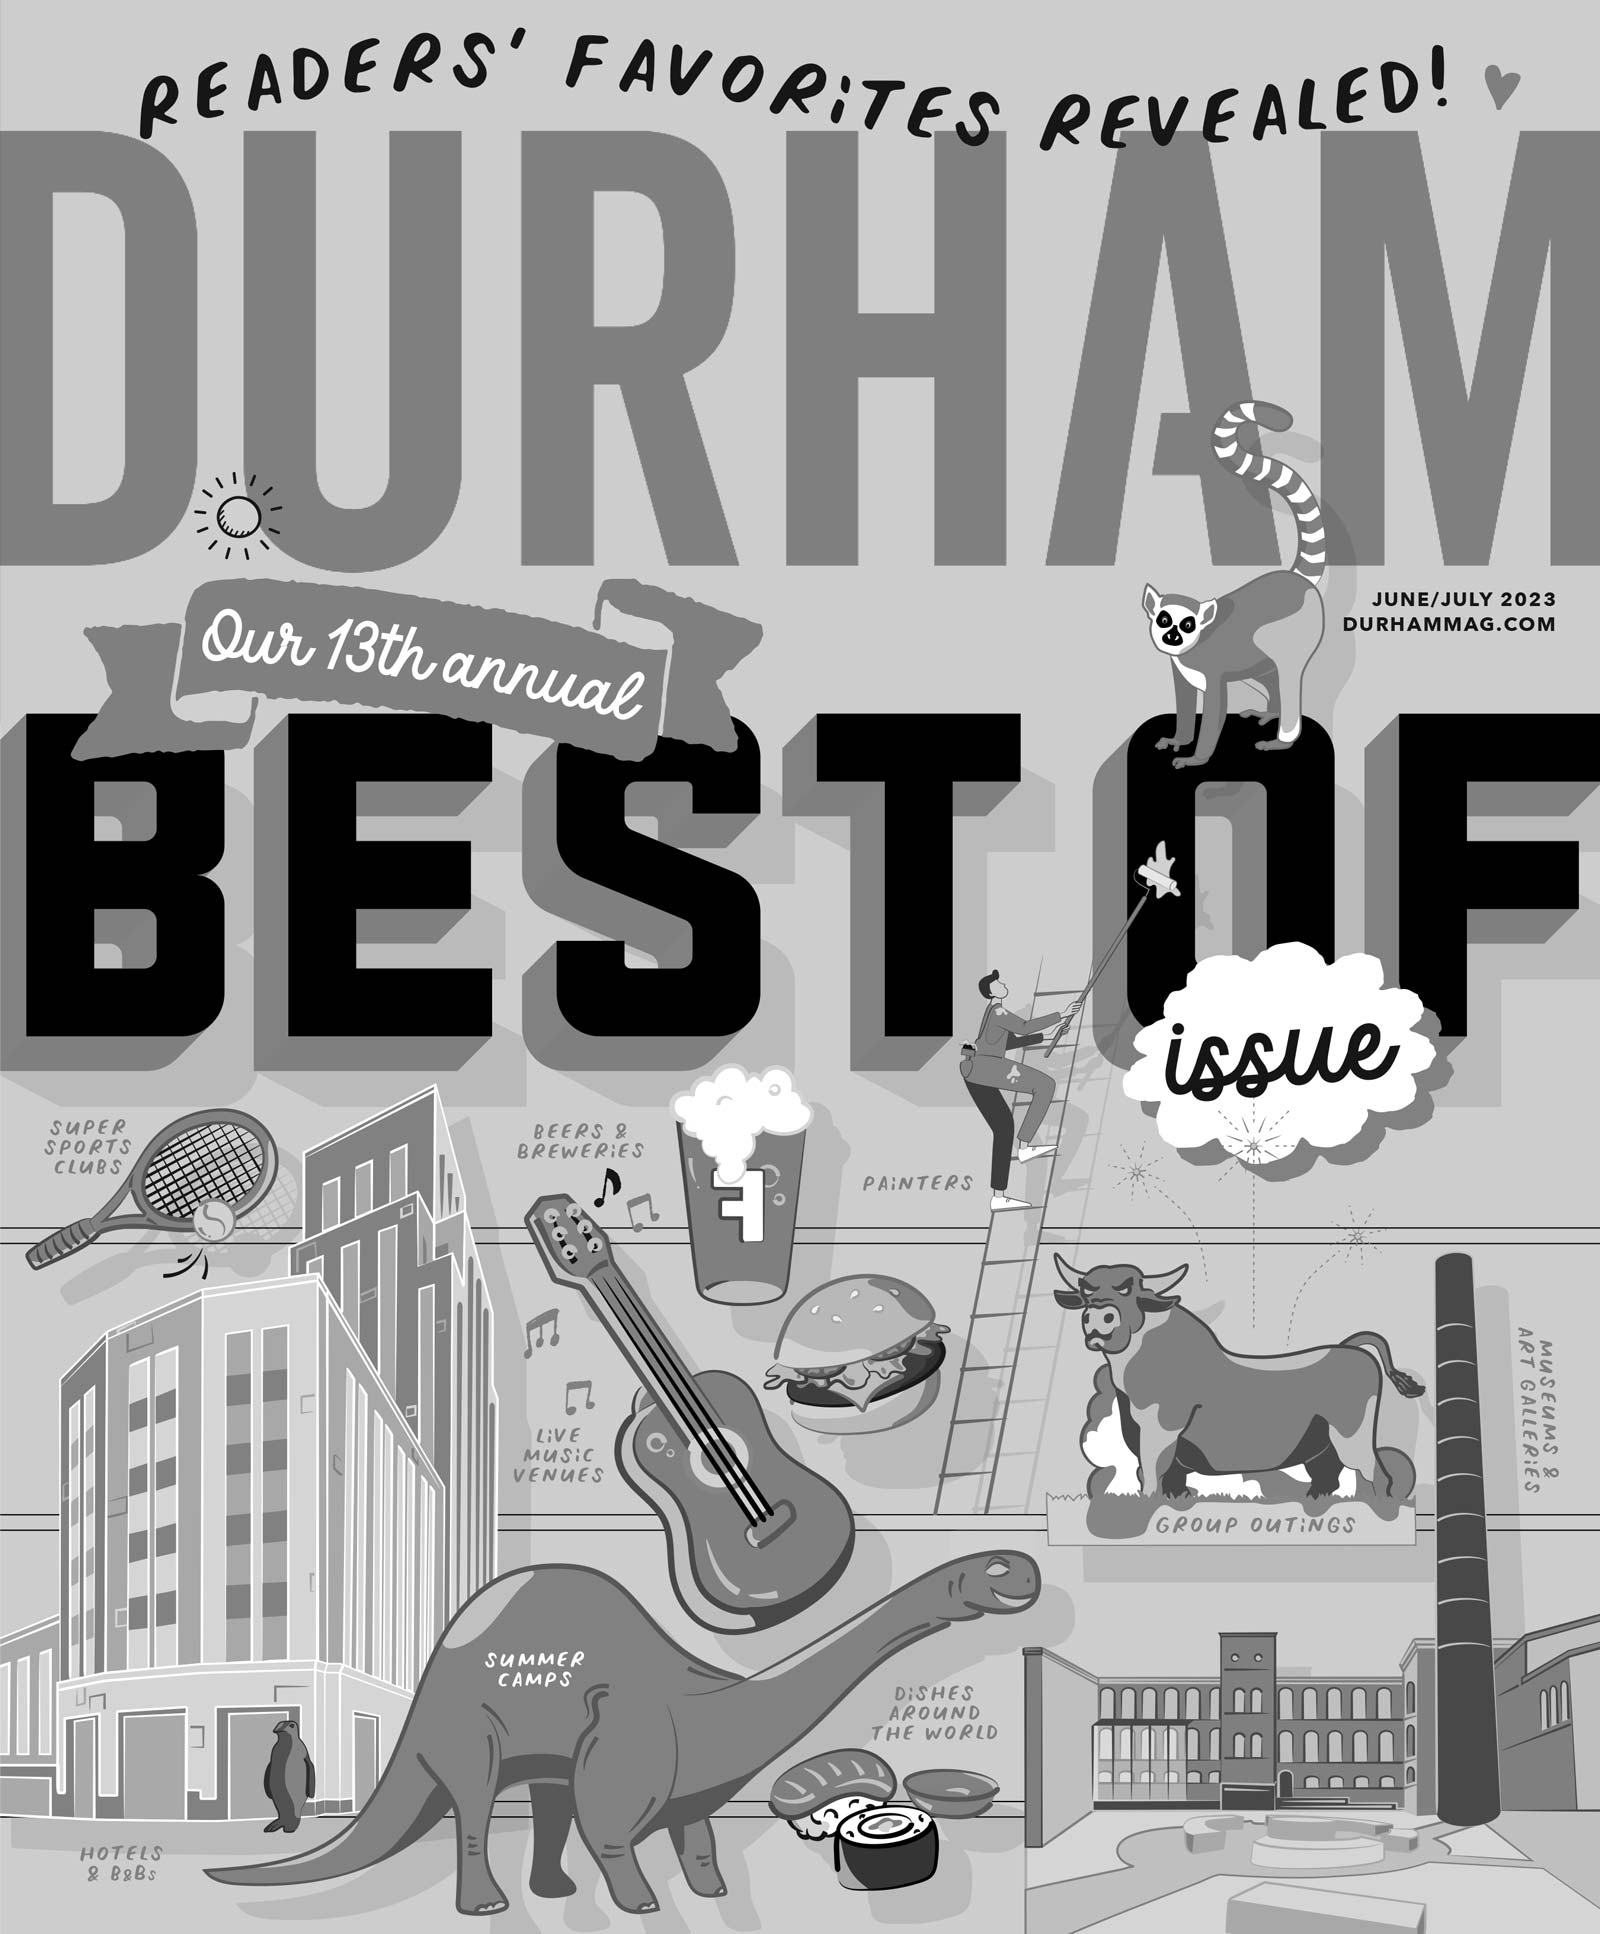 Cover of Durham Magazine 13th annual best of durham issue